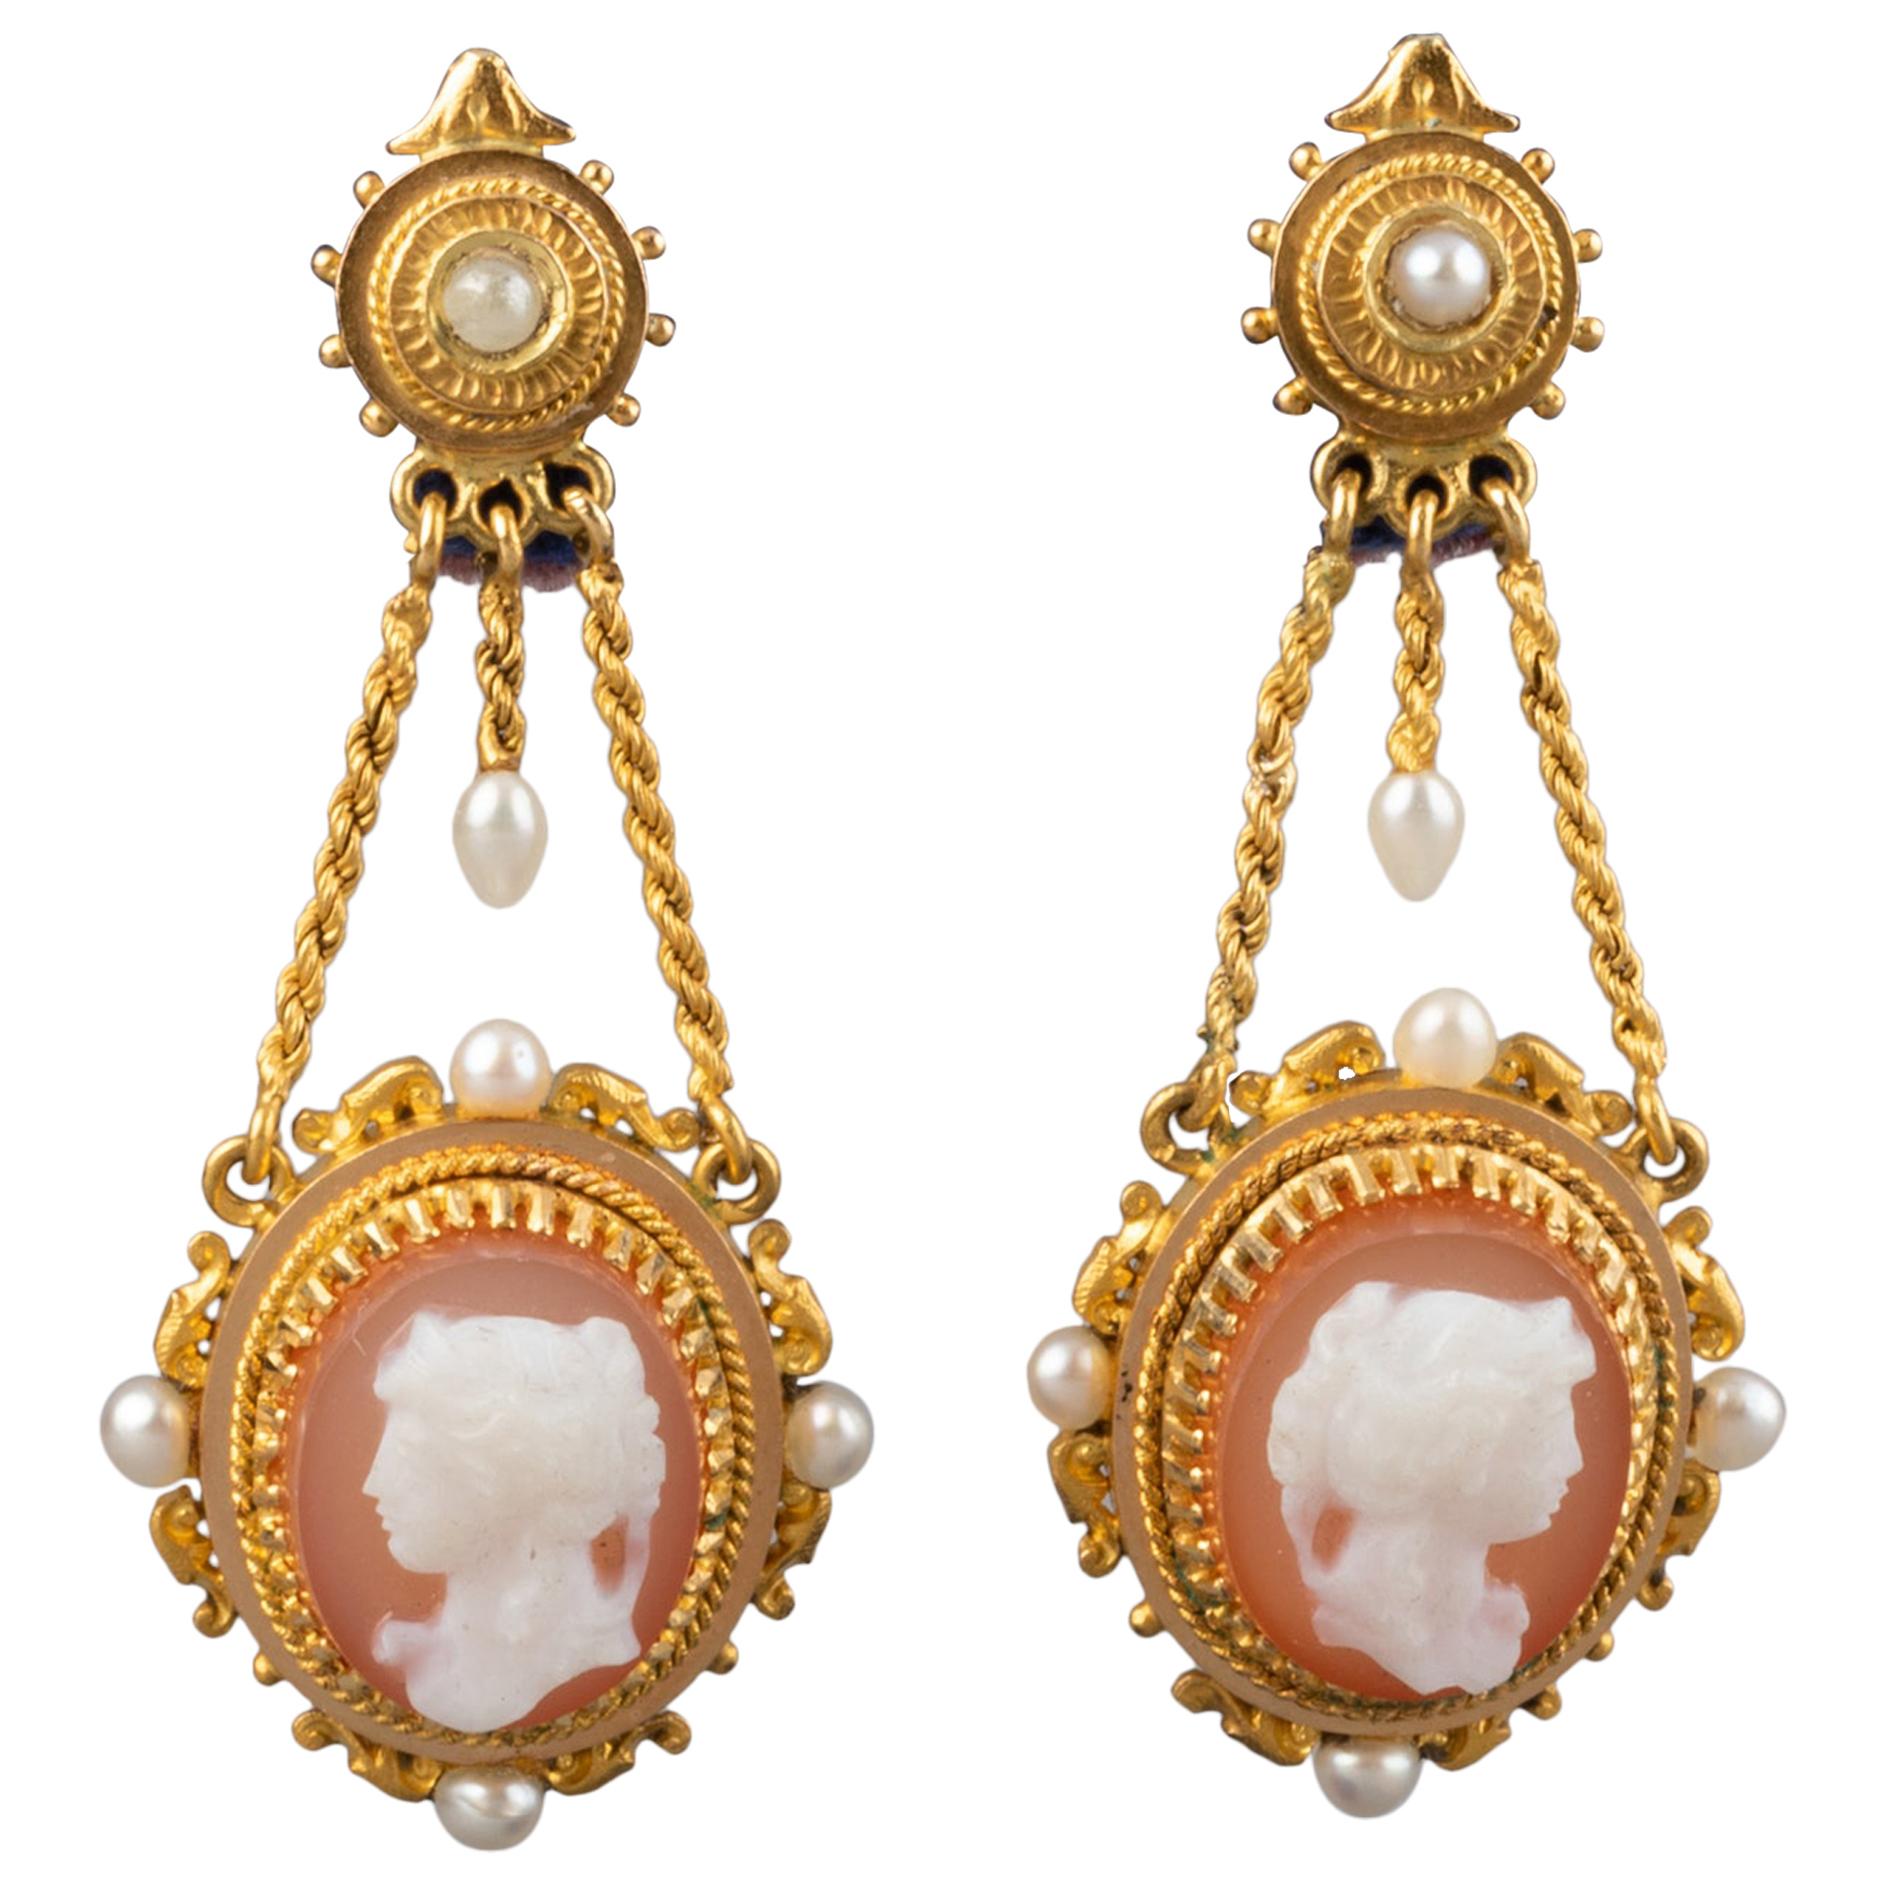 Gold and Agate Antique Napoleon III Earrings For Sale